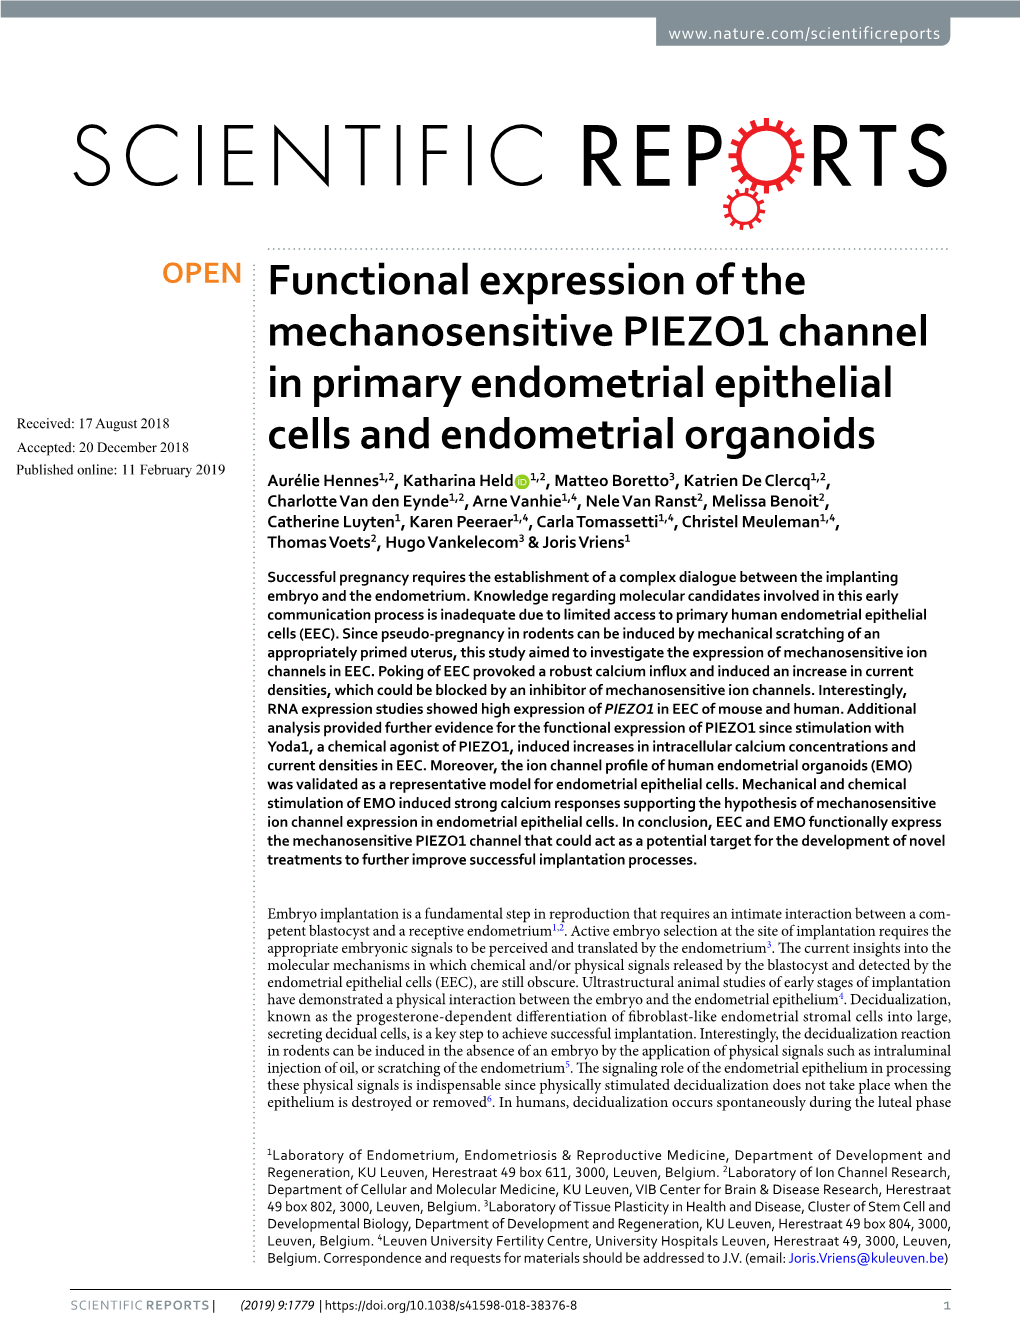 Functional Expression of the Mechanosensitive PIEZO1 Channel